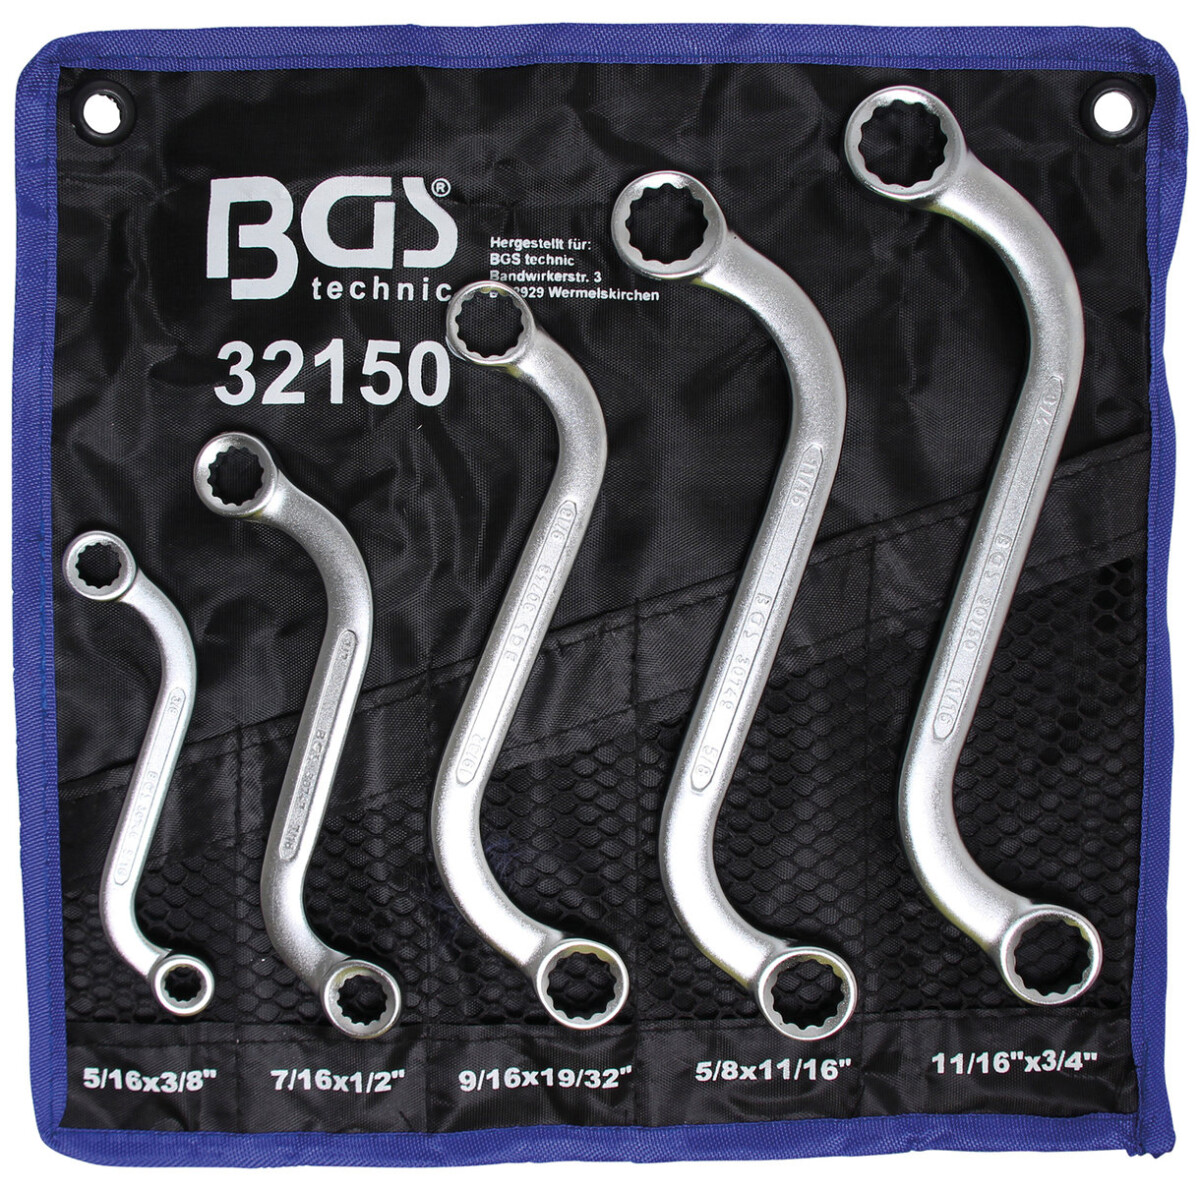 BGS S-Type Double Ring Spanner Set | Inch Sizes | 3/8 - 3/4 | 5 pcs. (BGS 32150)